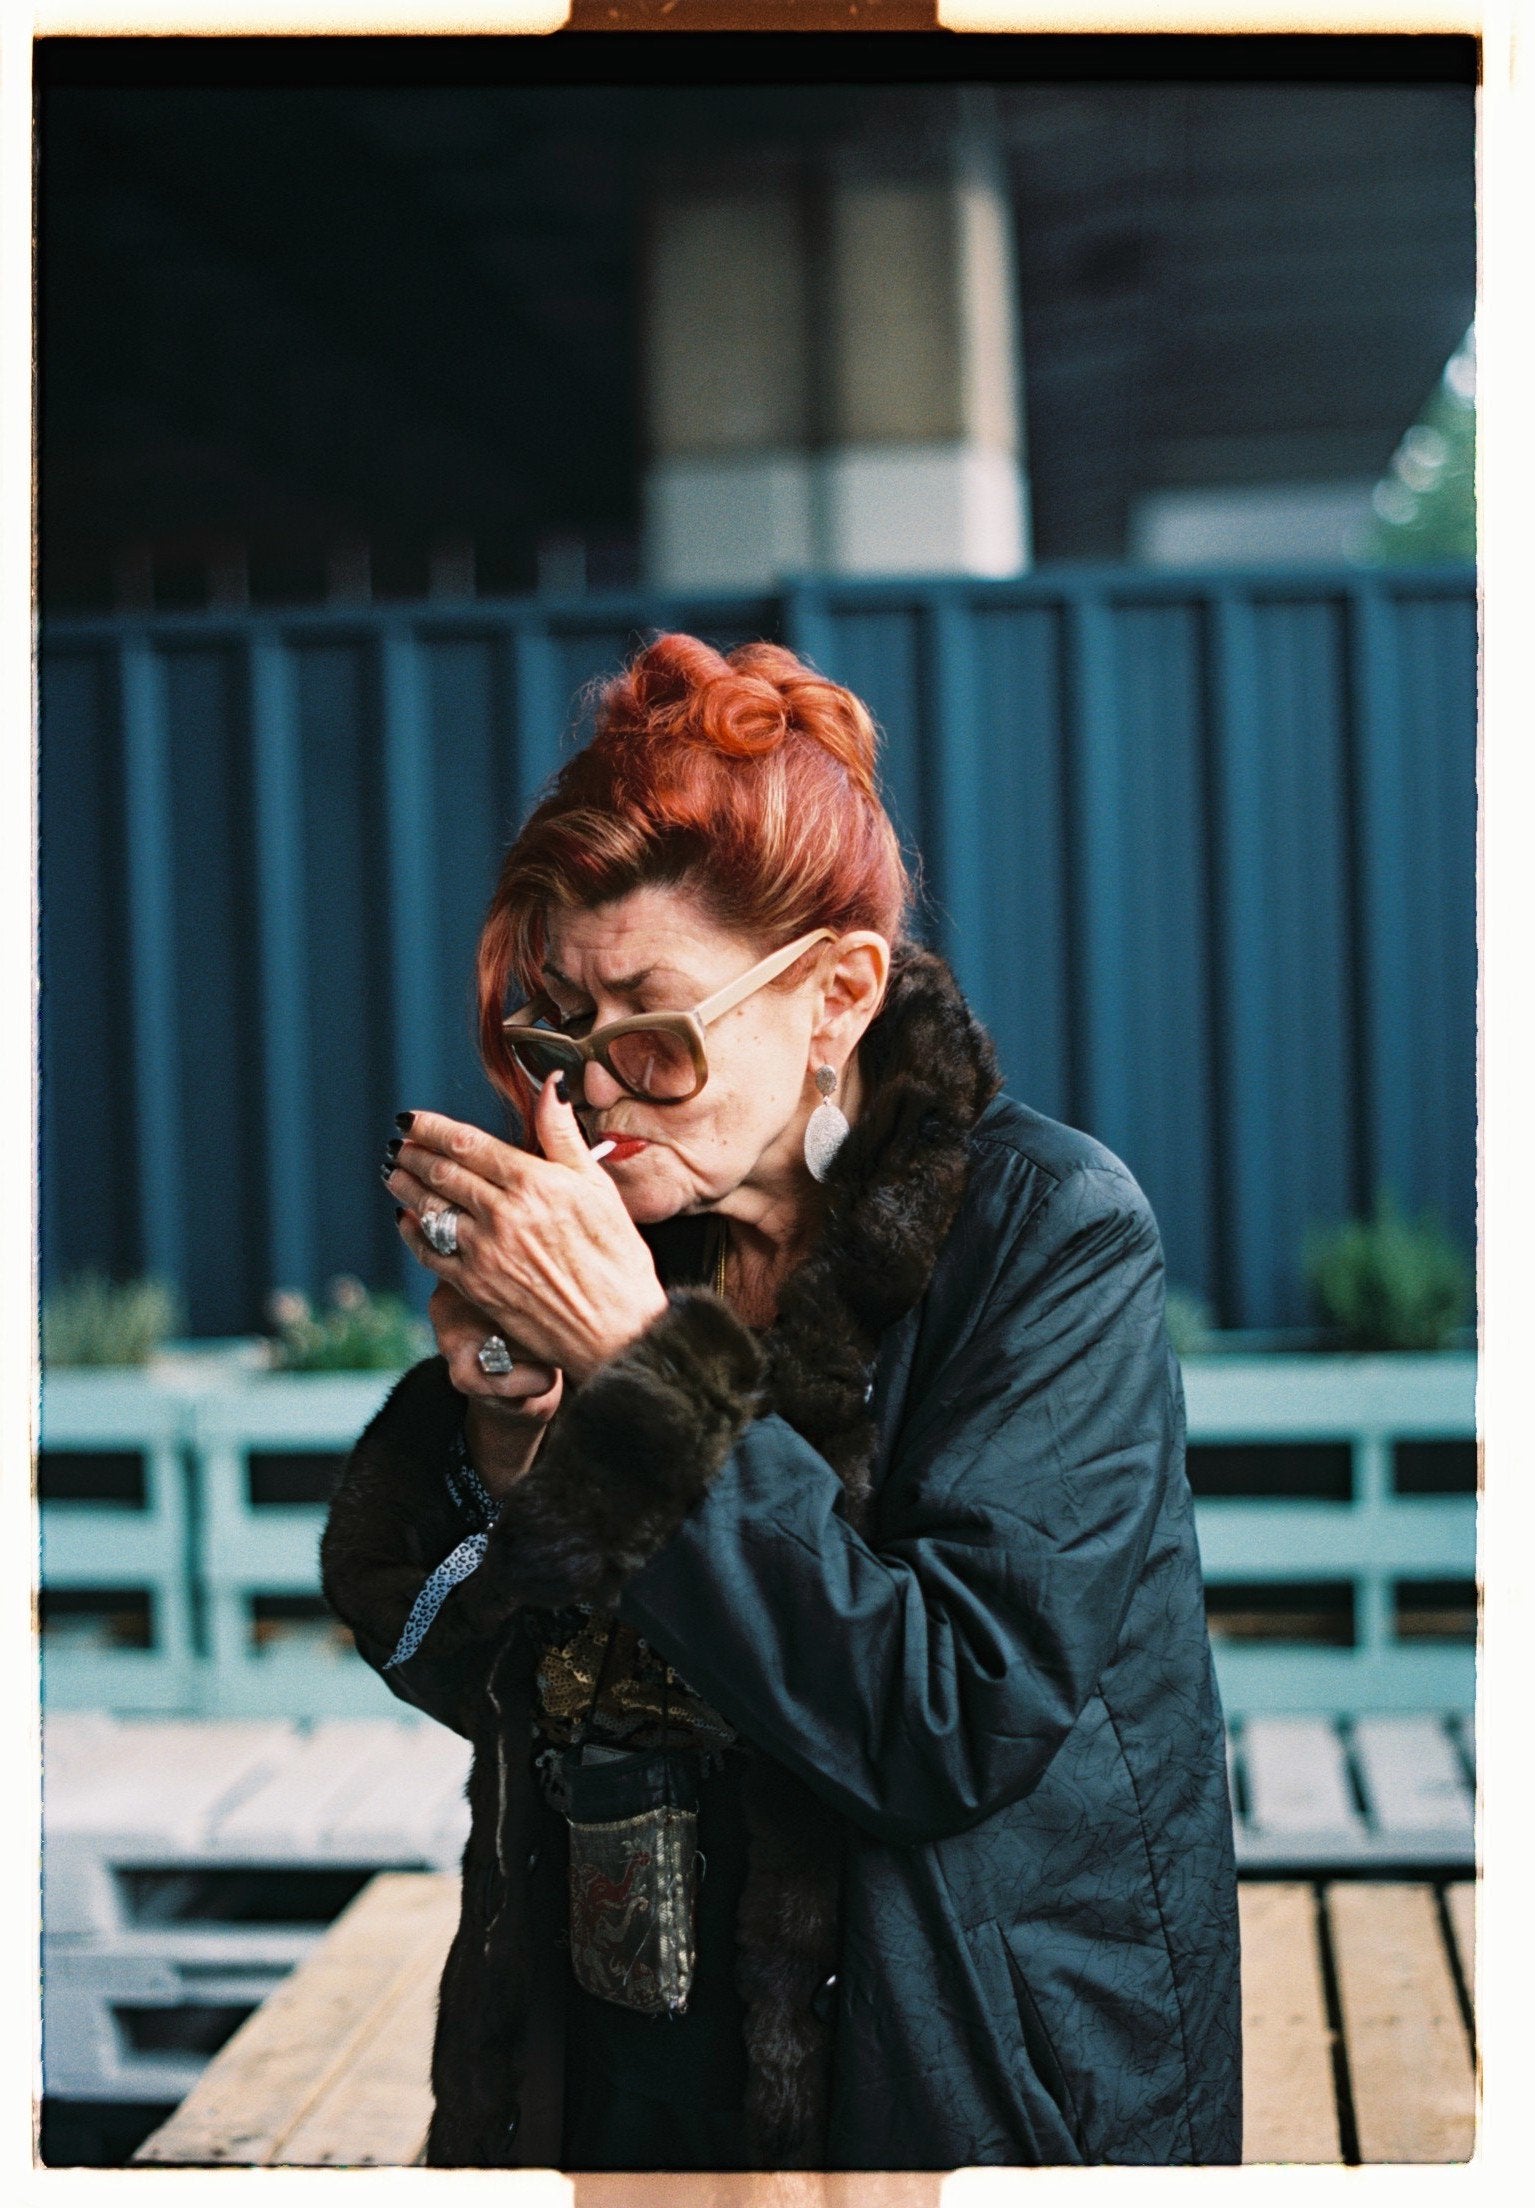 The Lady in West London | Lily Bertrand-Webb | Photography | Partnership Editions